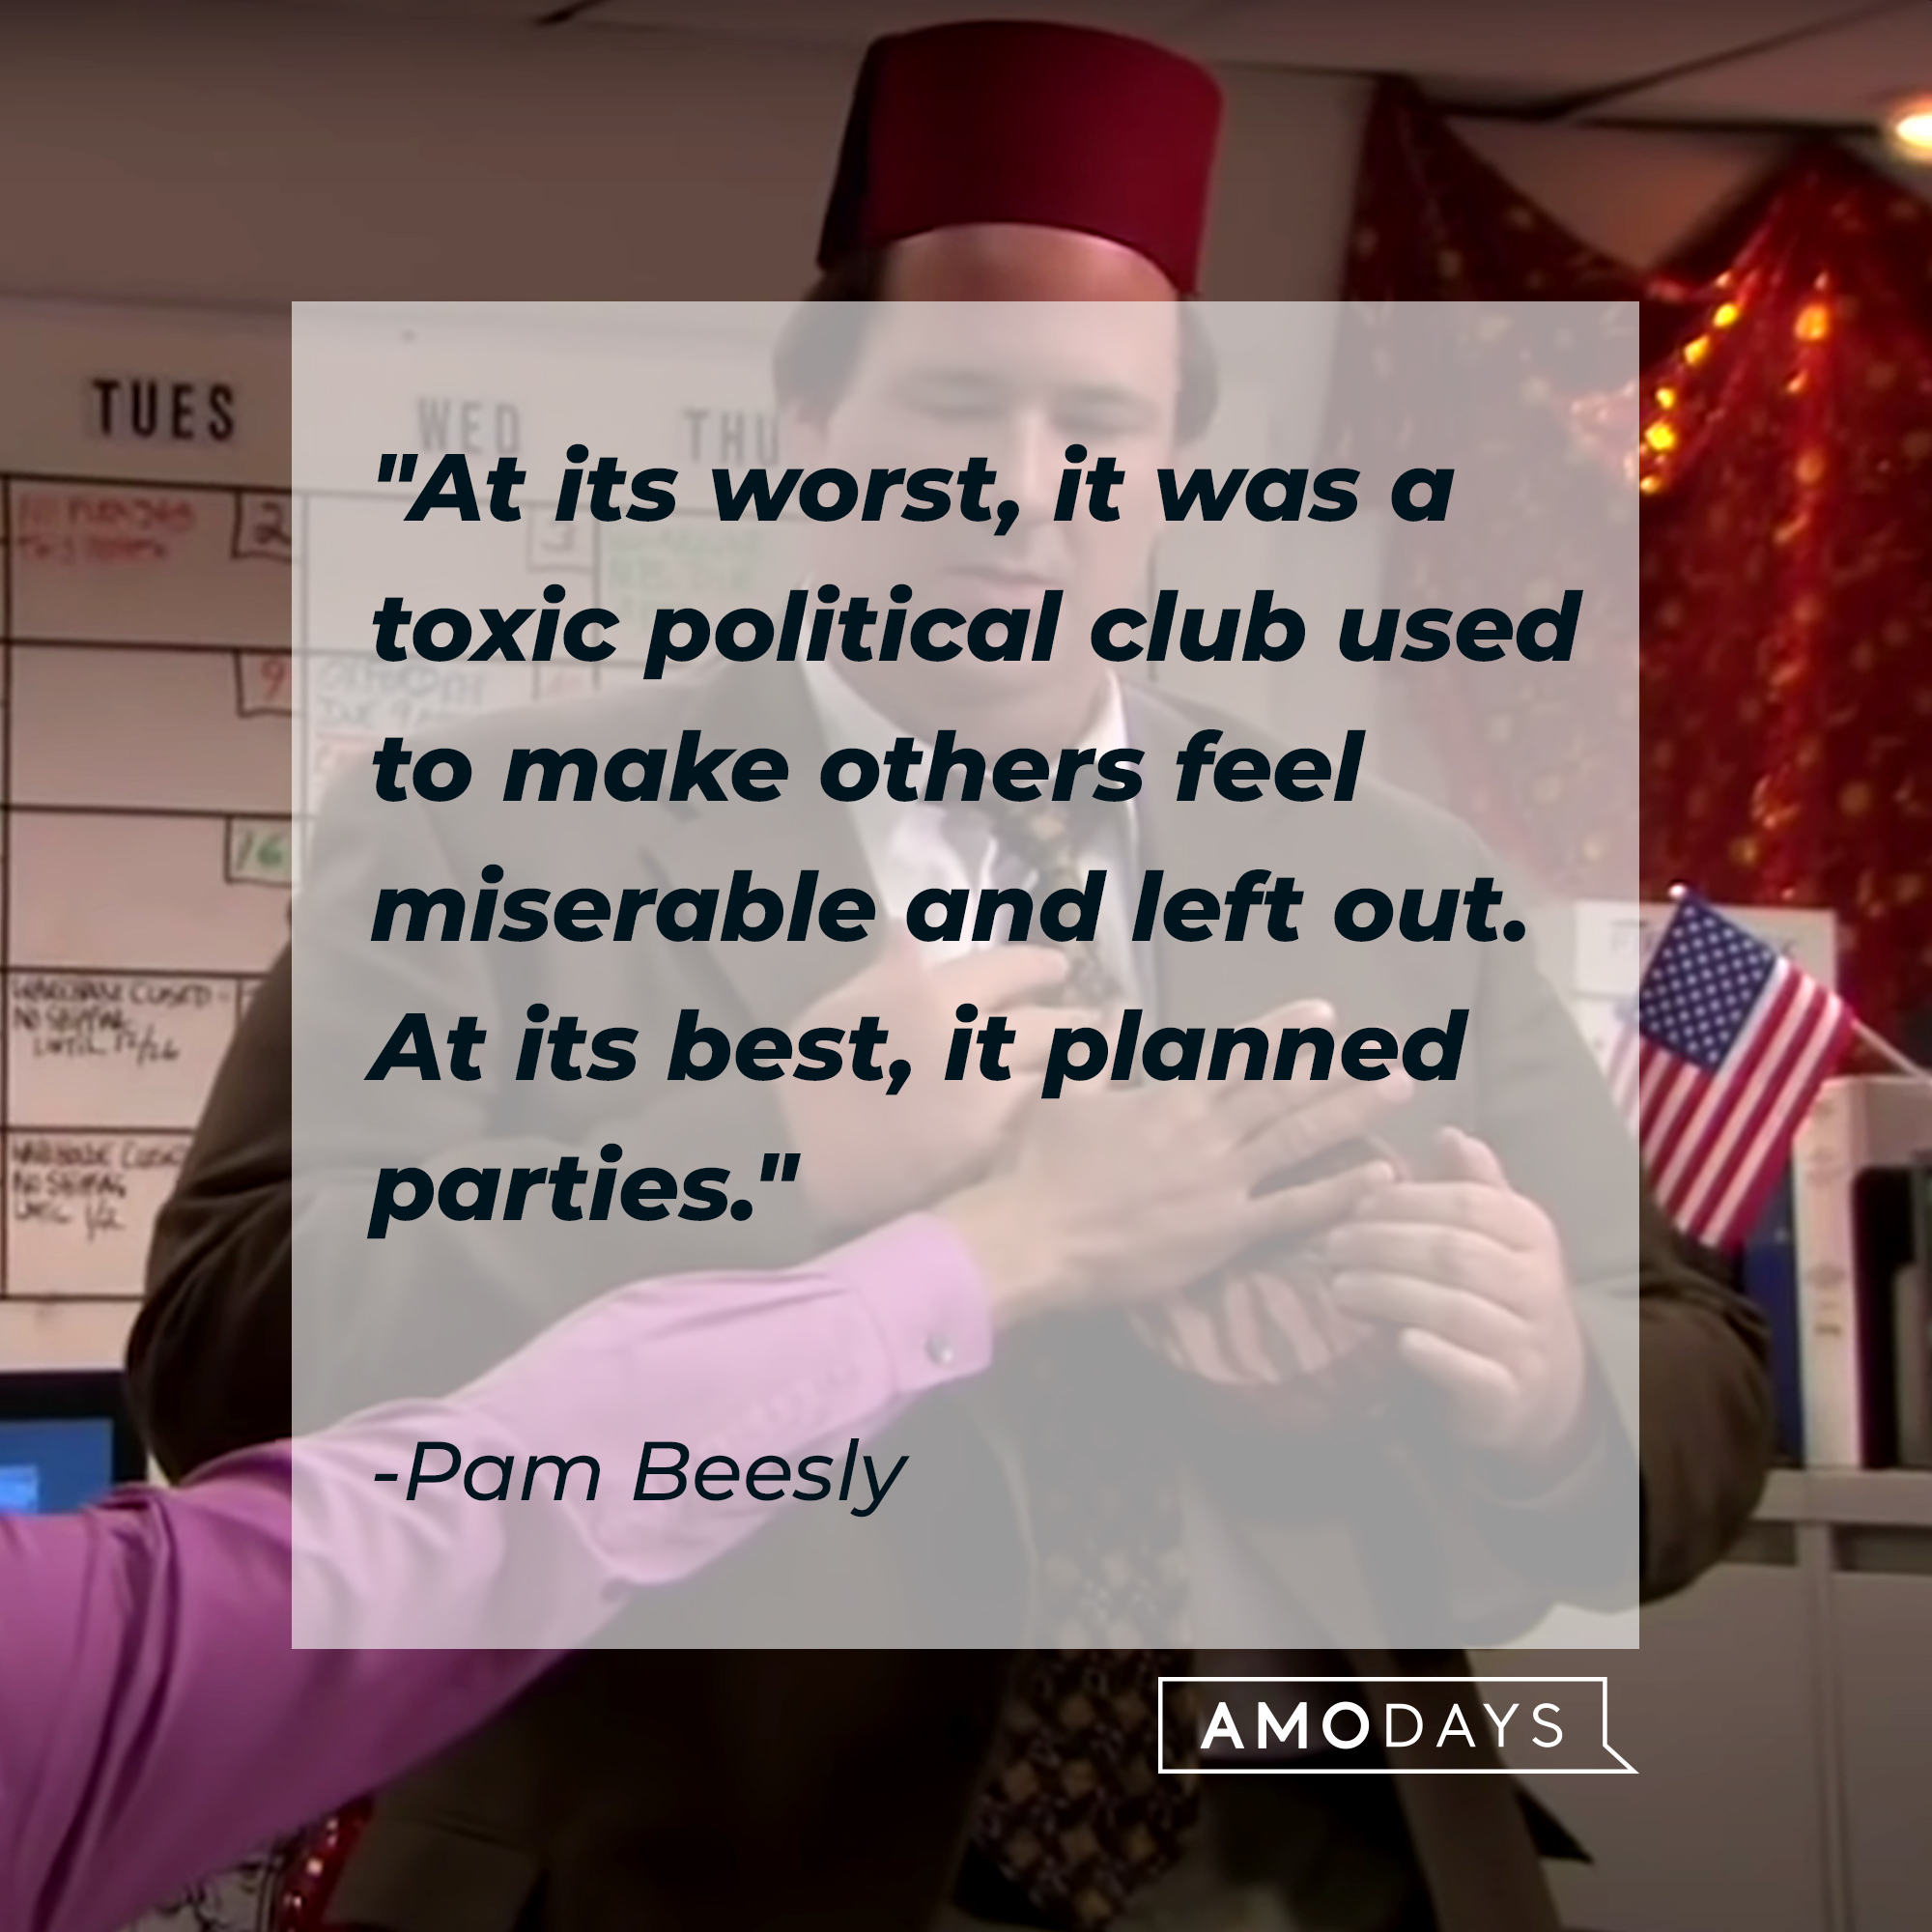 Pam Beesly’s quote: "At its worst, it was a toxic political club used to make others feel miserable and left out. At its best, it planned parties." | Source: Youtube/TheOffice